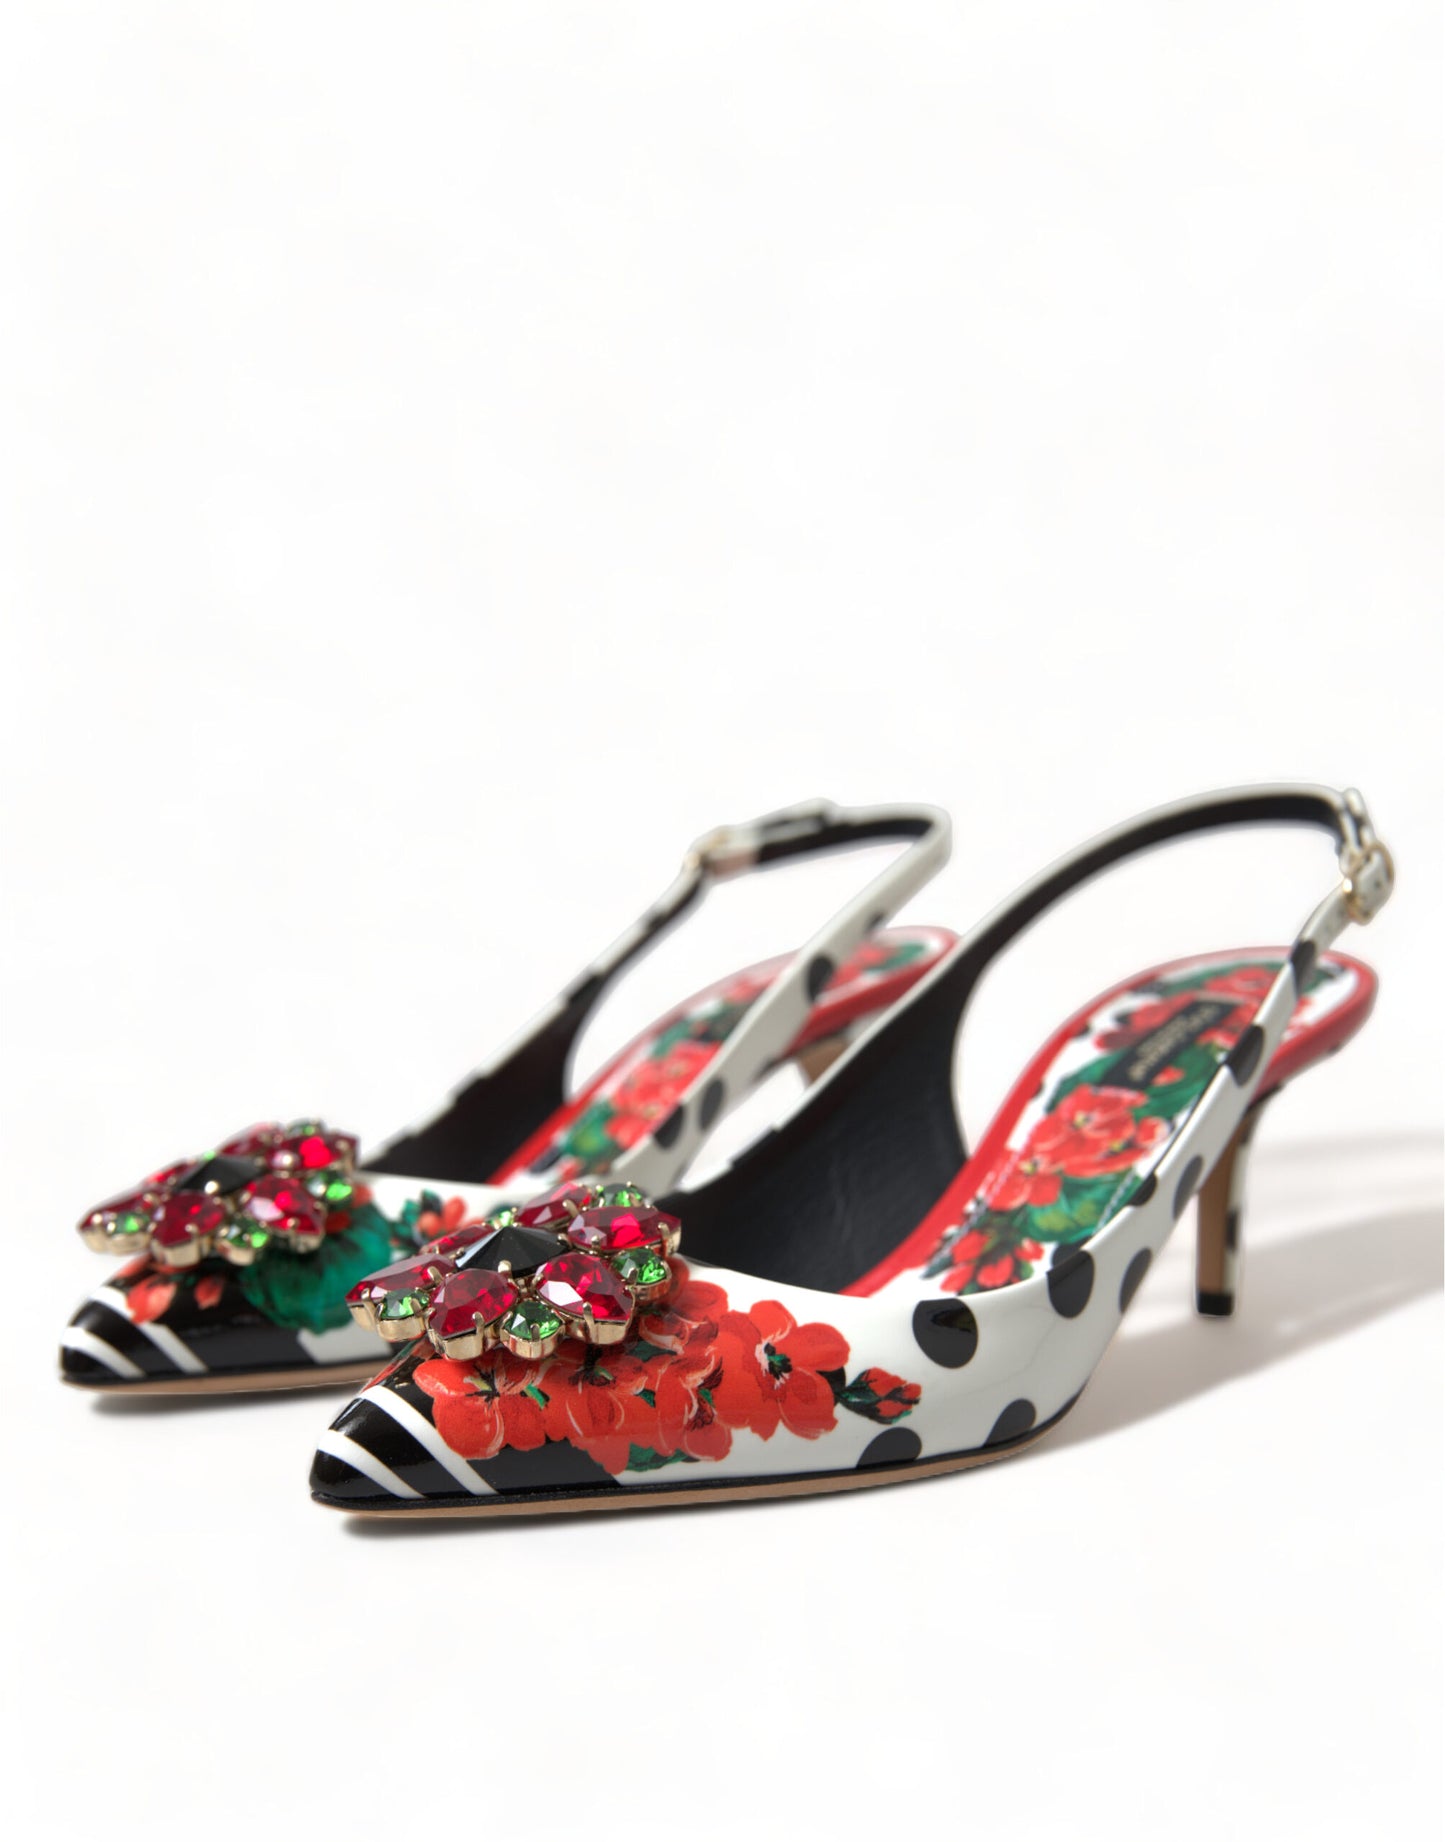 Chic Multicolor Floral Slingback Heels with Crystals